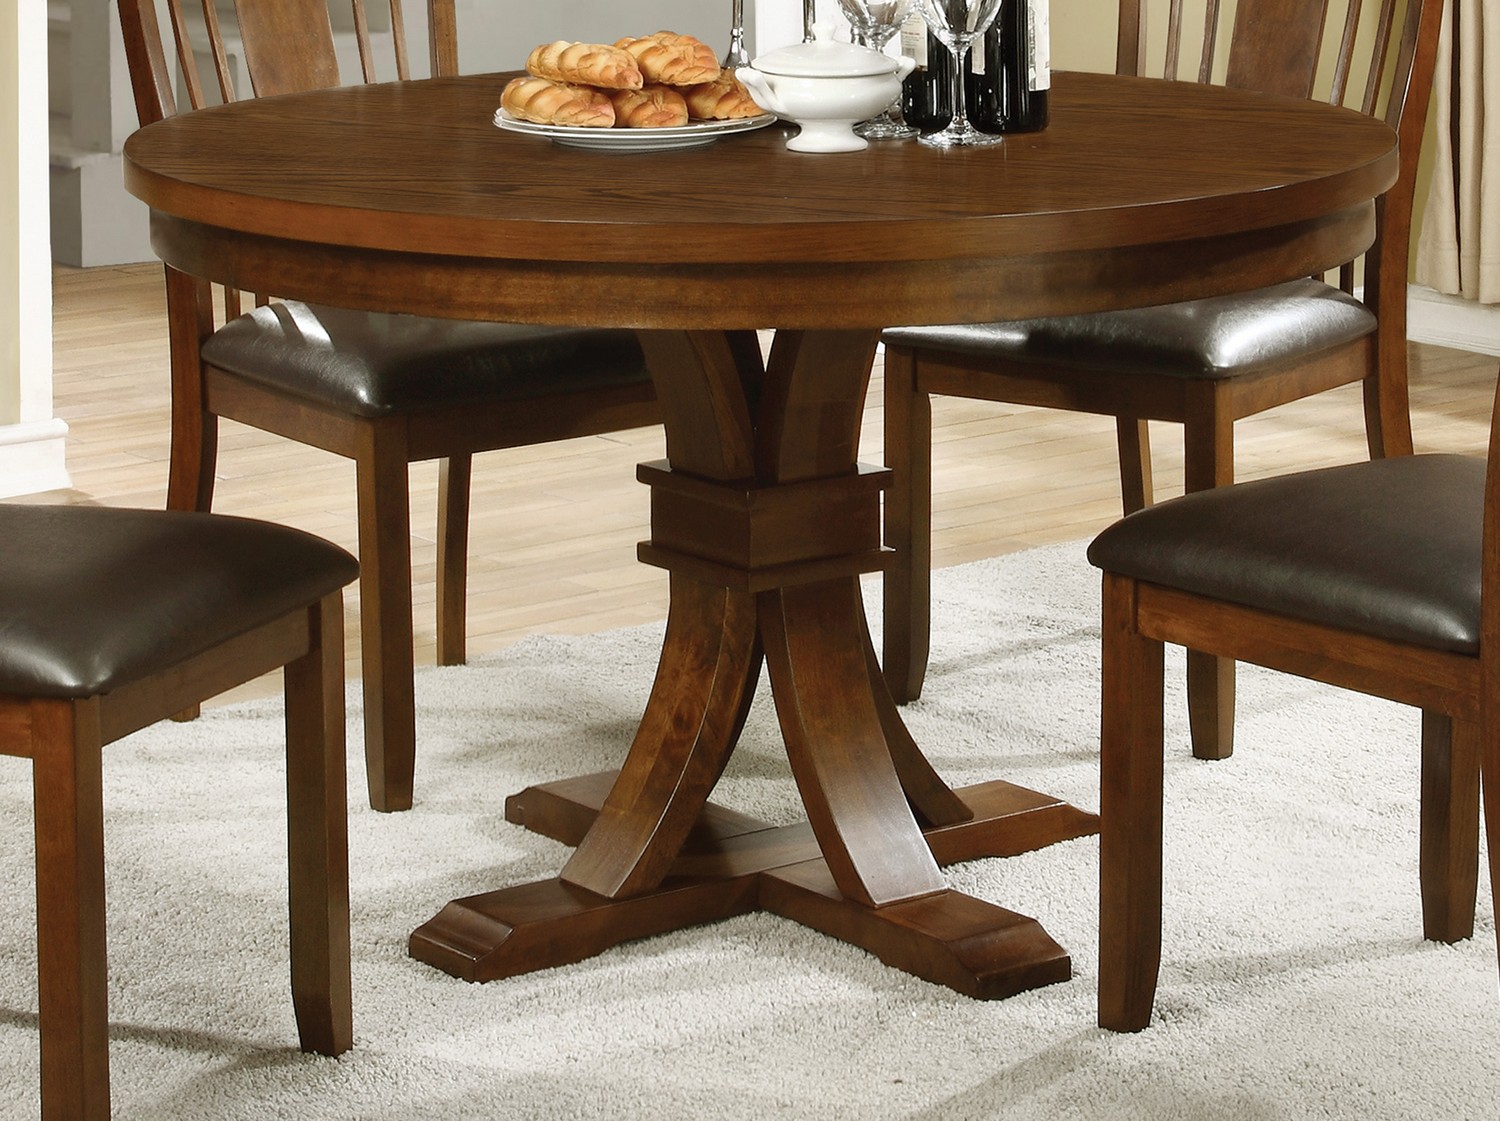 Coaster Abrams Round Dining Table - Truffle